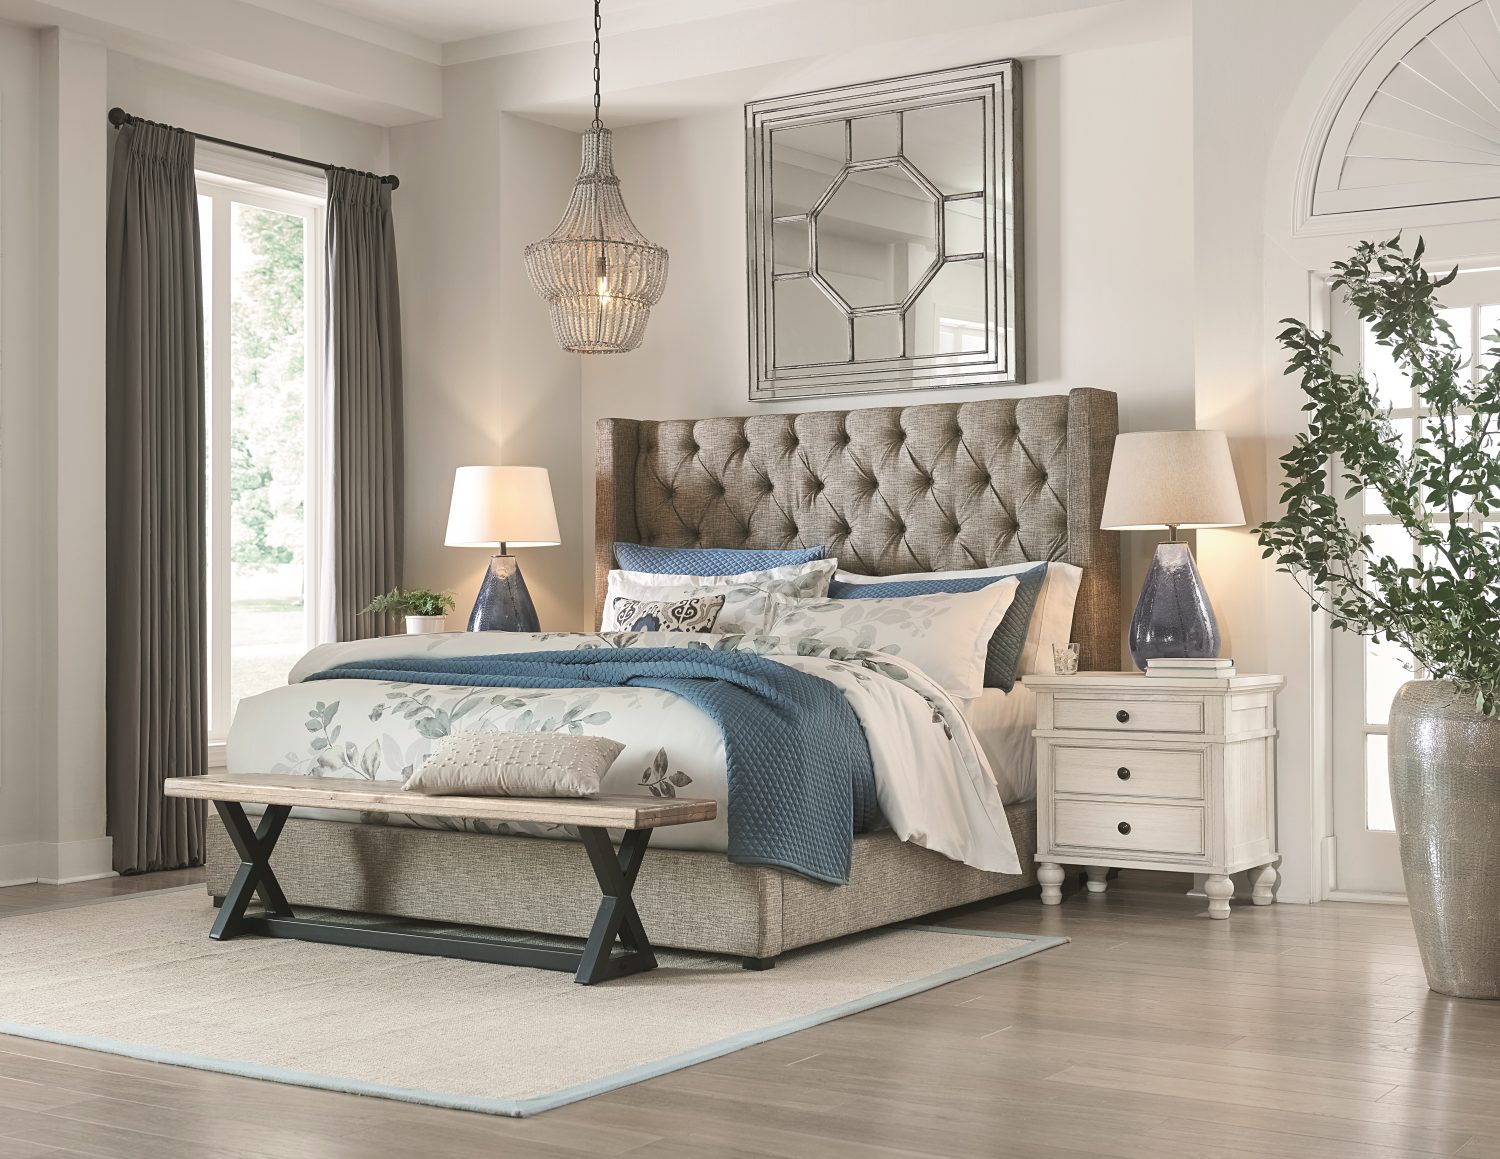 Our Instagram Stars: The Sorinella Bed Edition - Ashley Furniture ...